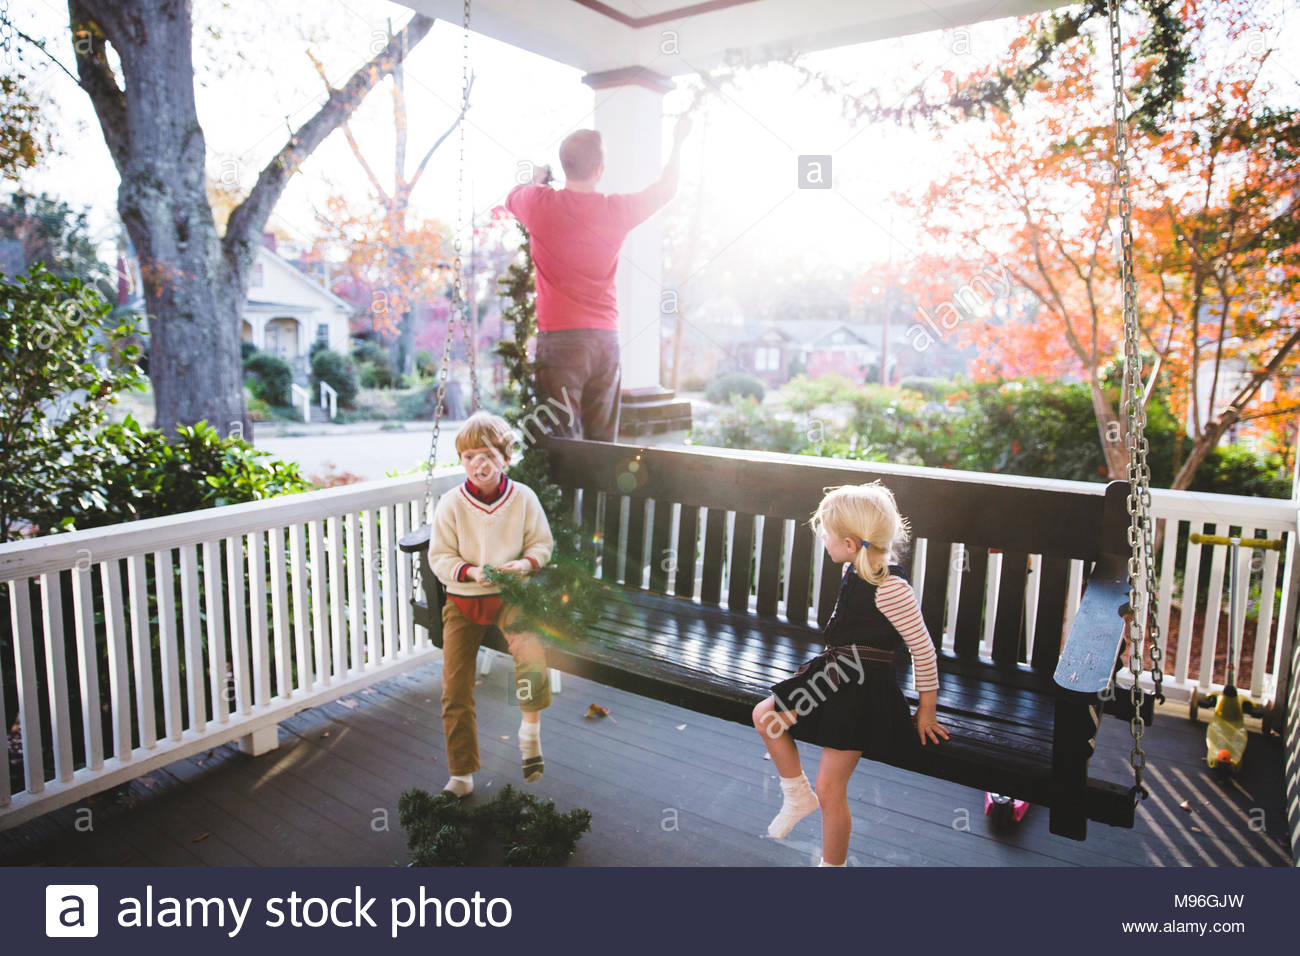 Kids Sitting On Swinging Bench With Man In Background Stock Photo